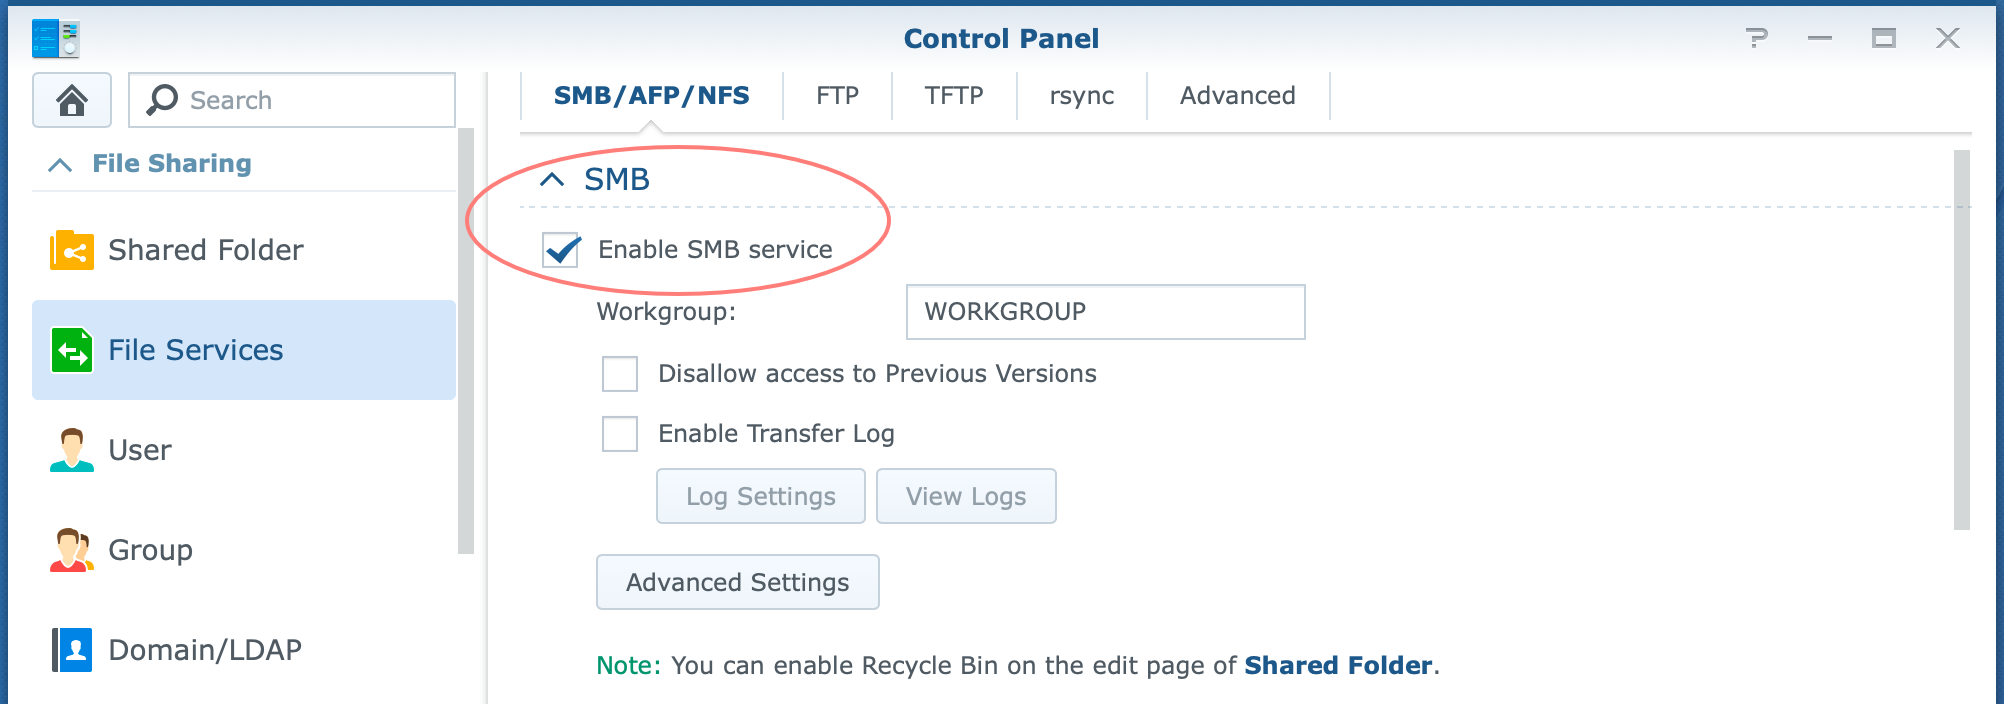 synology, control panel, file services, smb